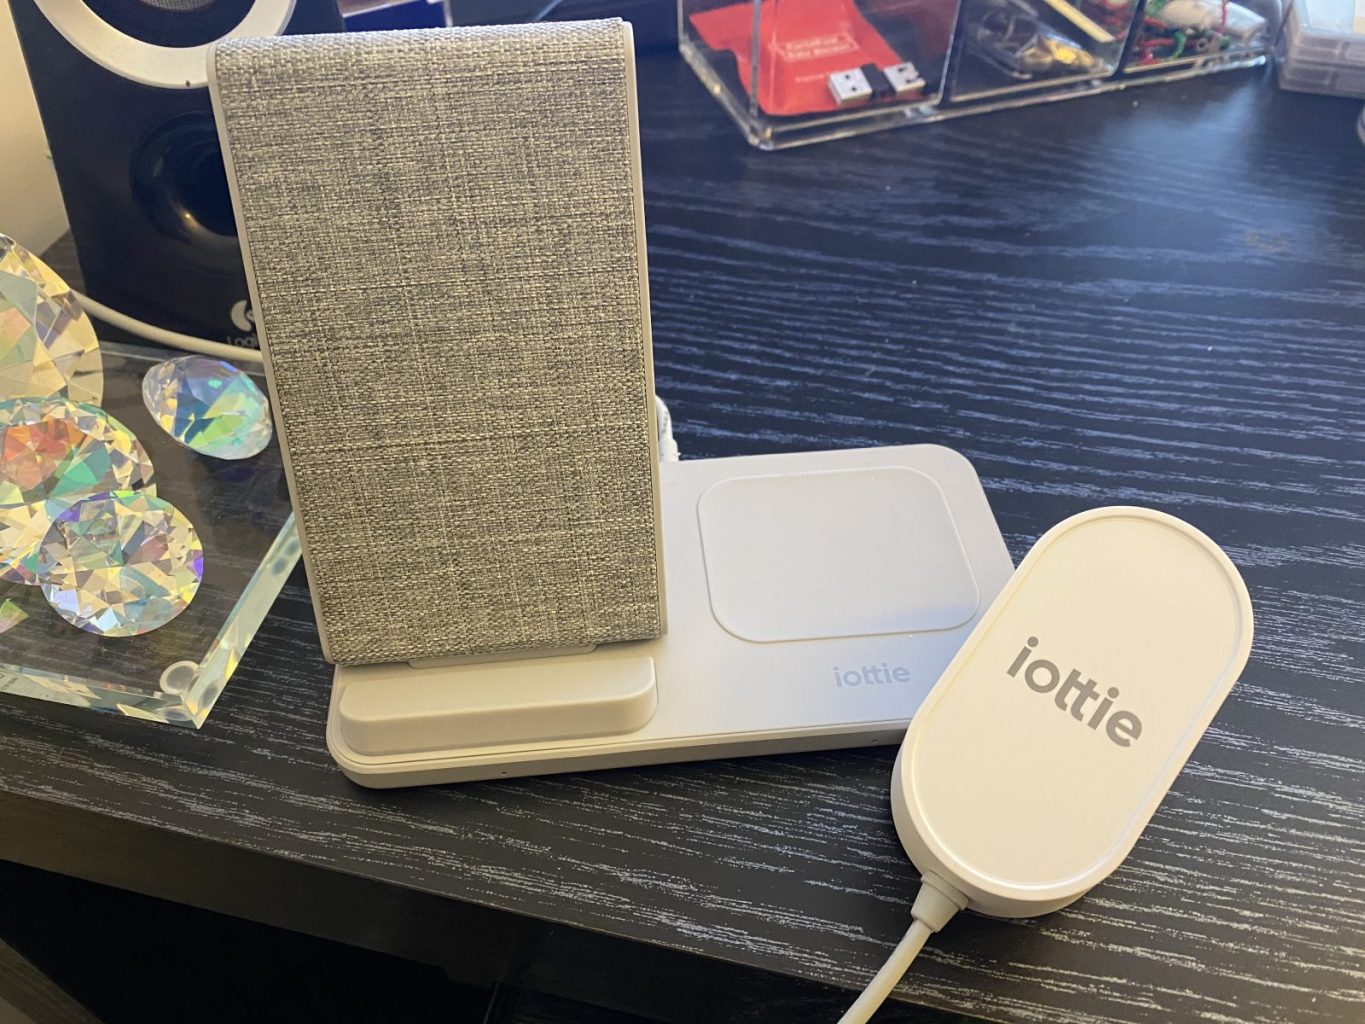 https://www.techwelike.com/wp-content/uploads/2020/11/iOttie-Wireless-Duo-Charging-Pad-Review-10-scaled.jpg